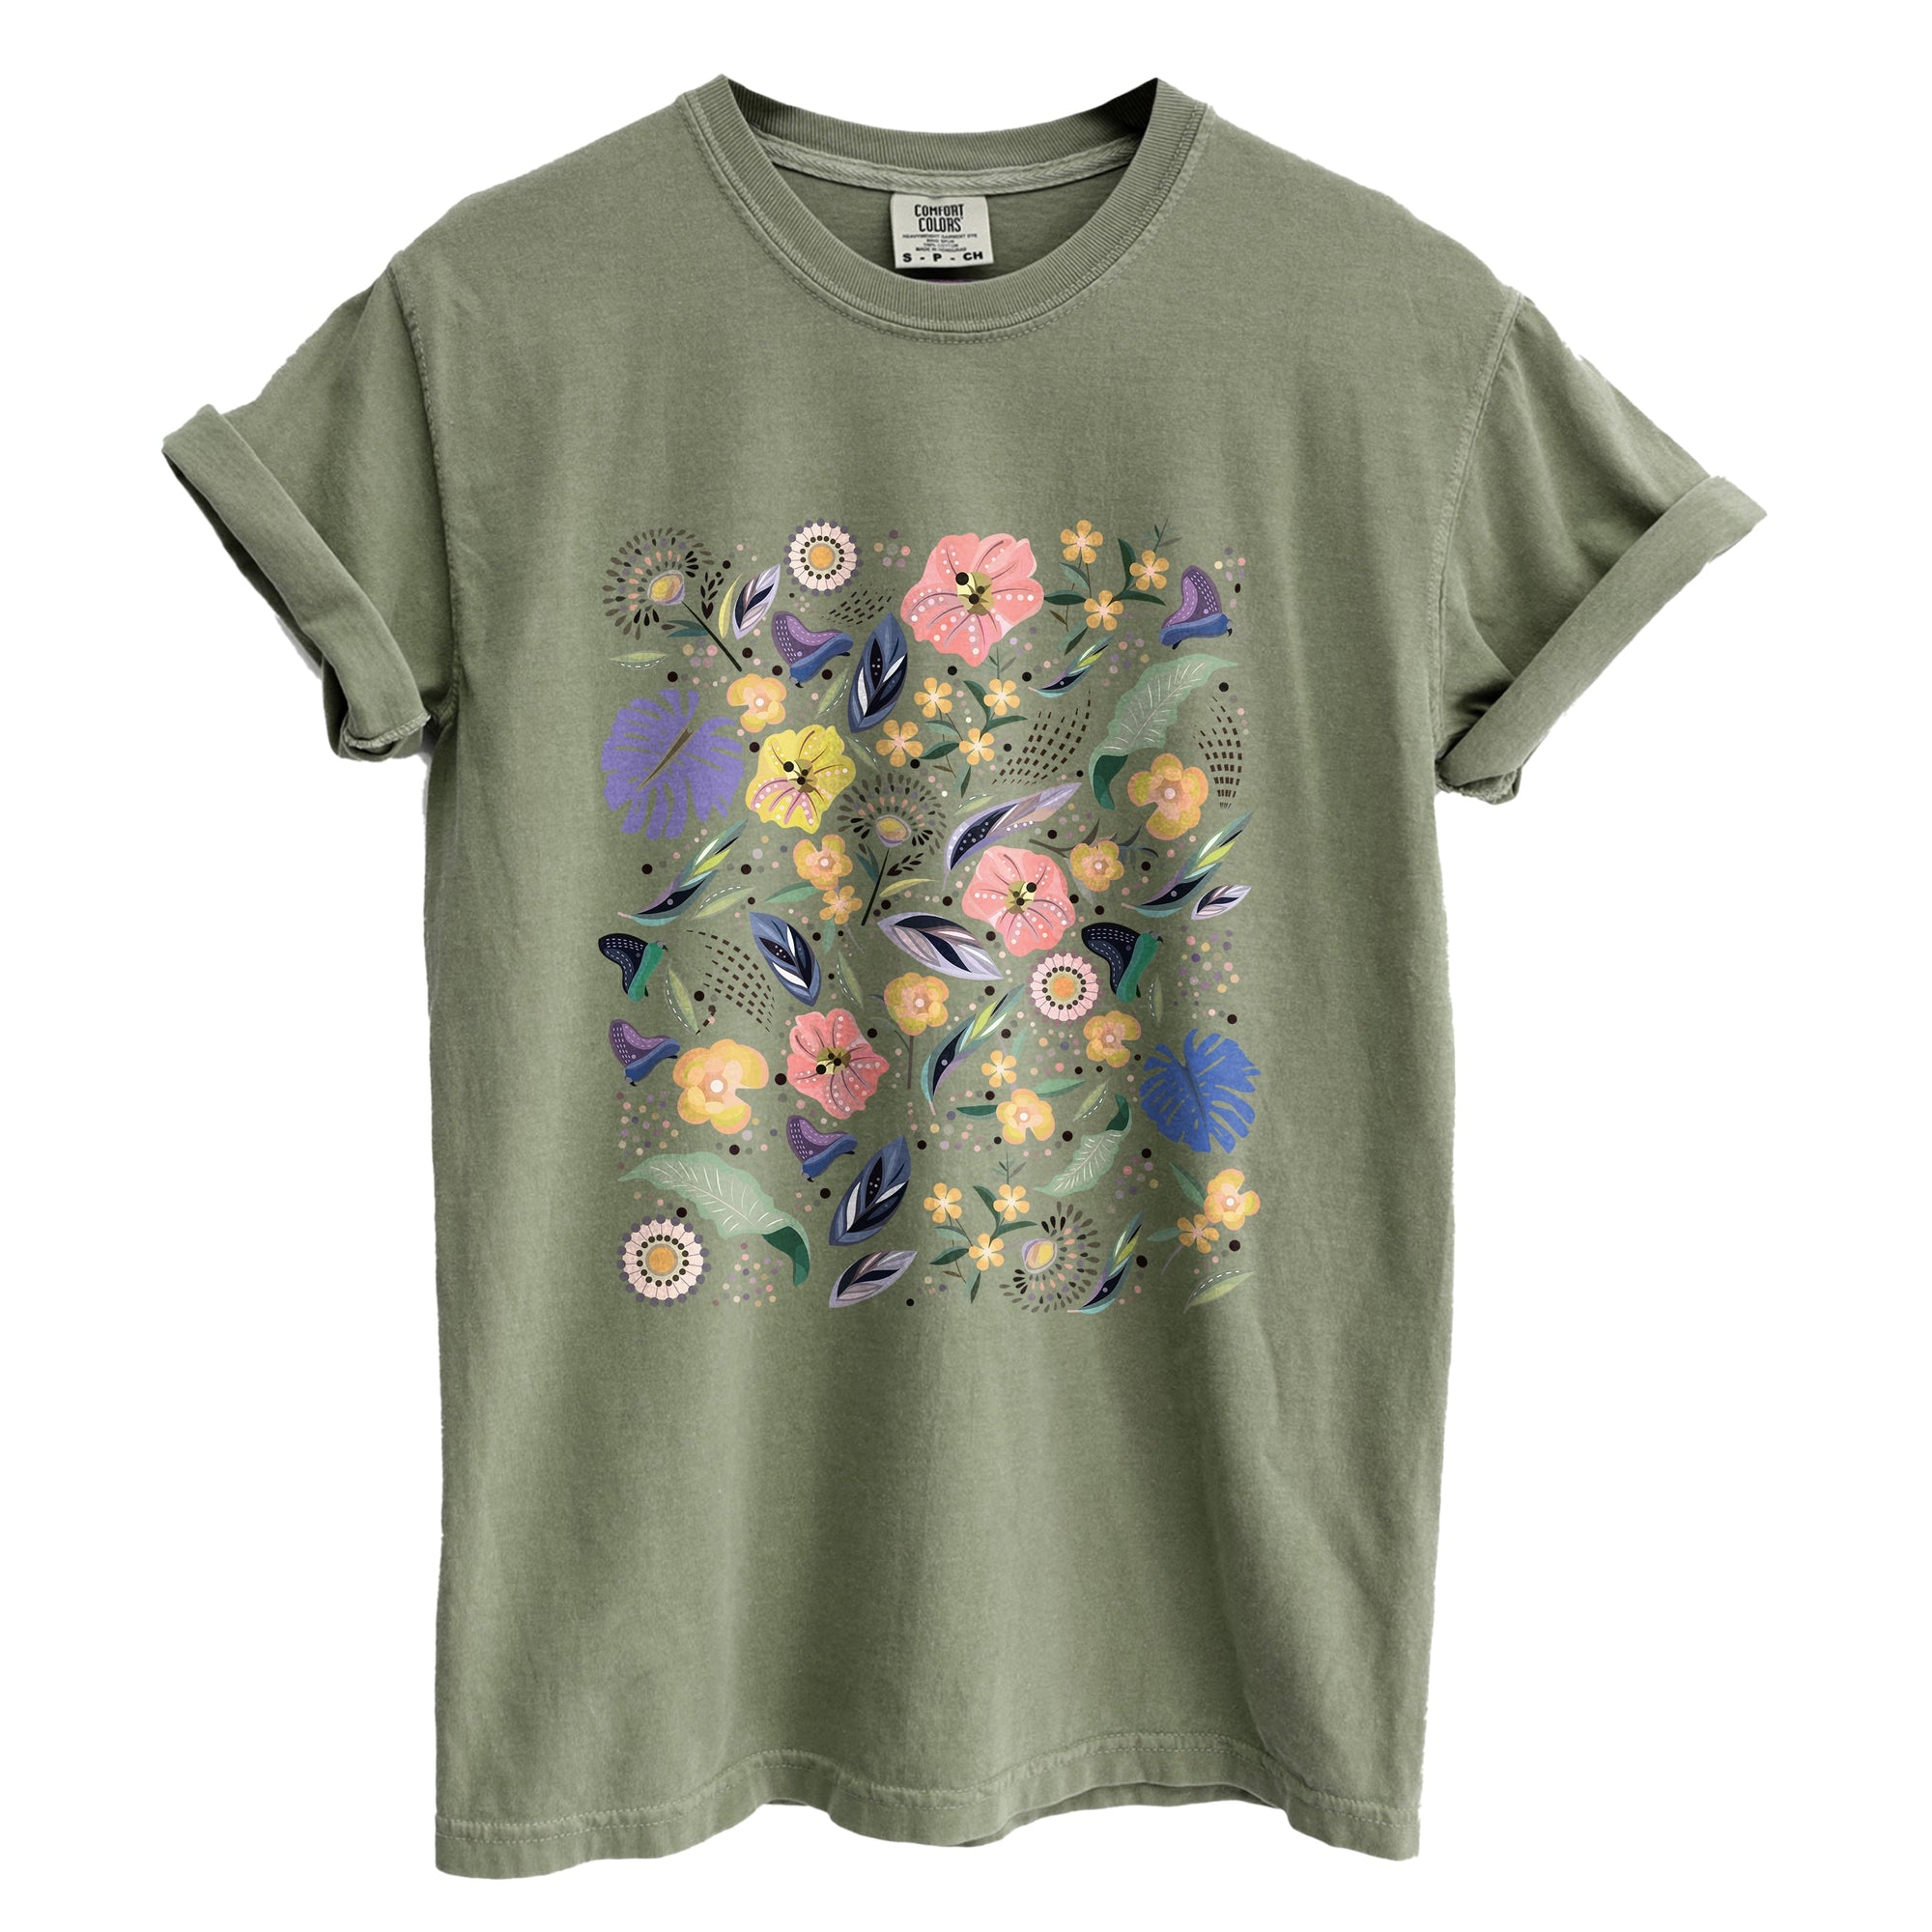 Wildflower Blossom Garment-Dyed Tee - Stories You Can Wear